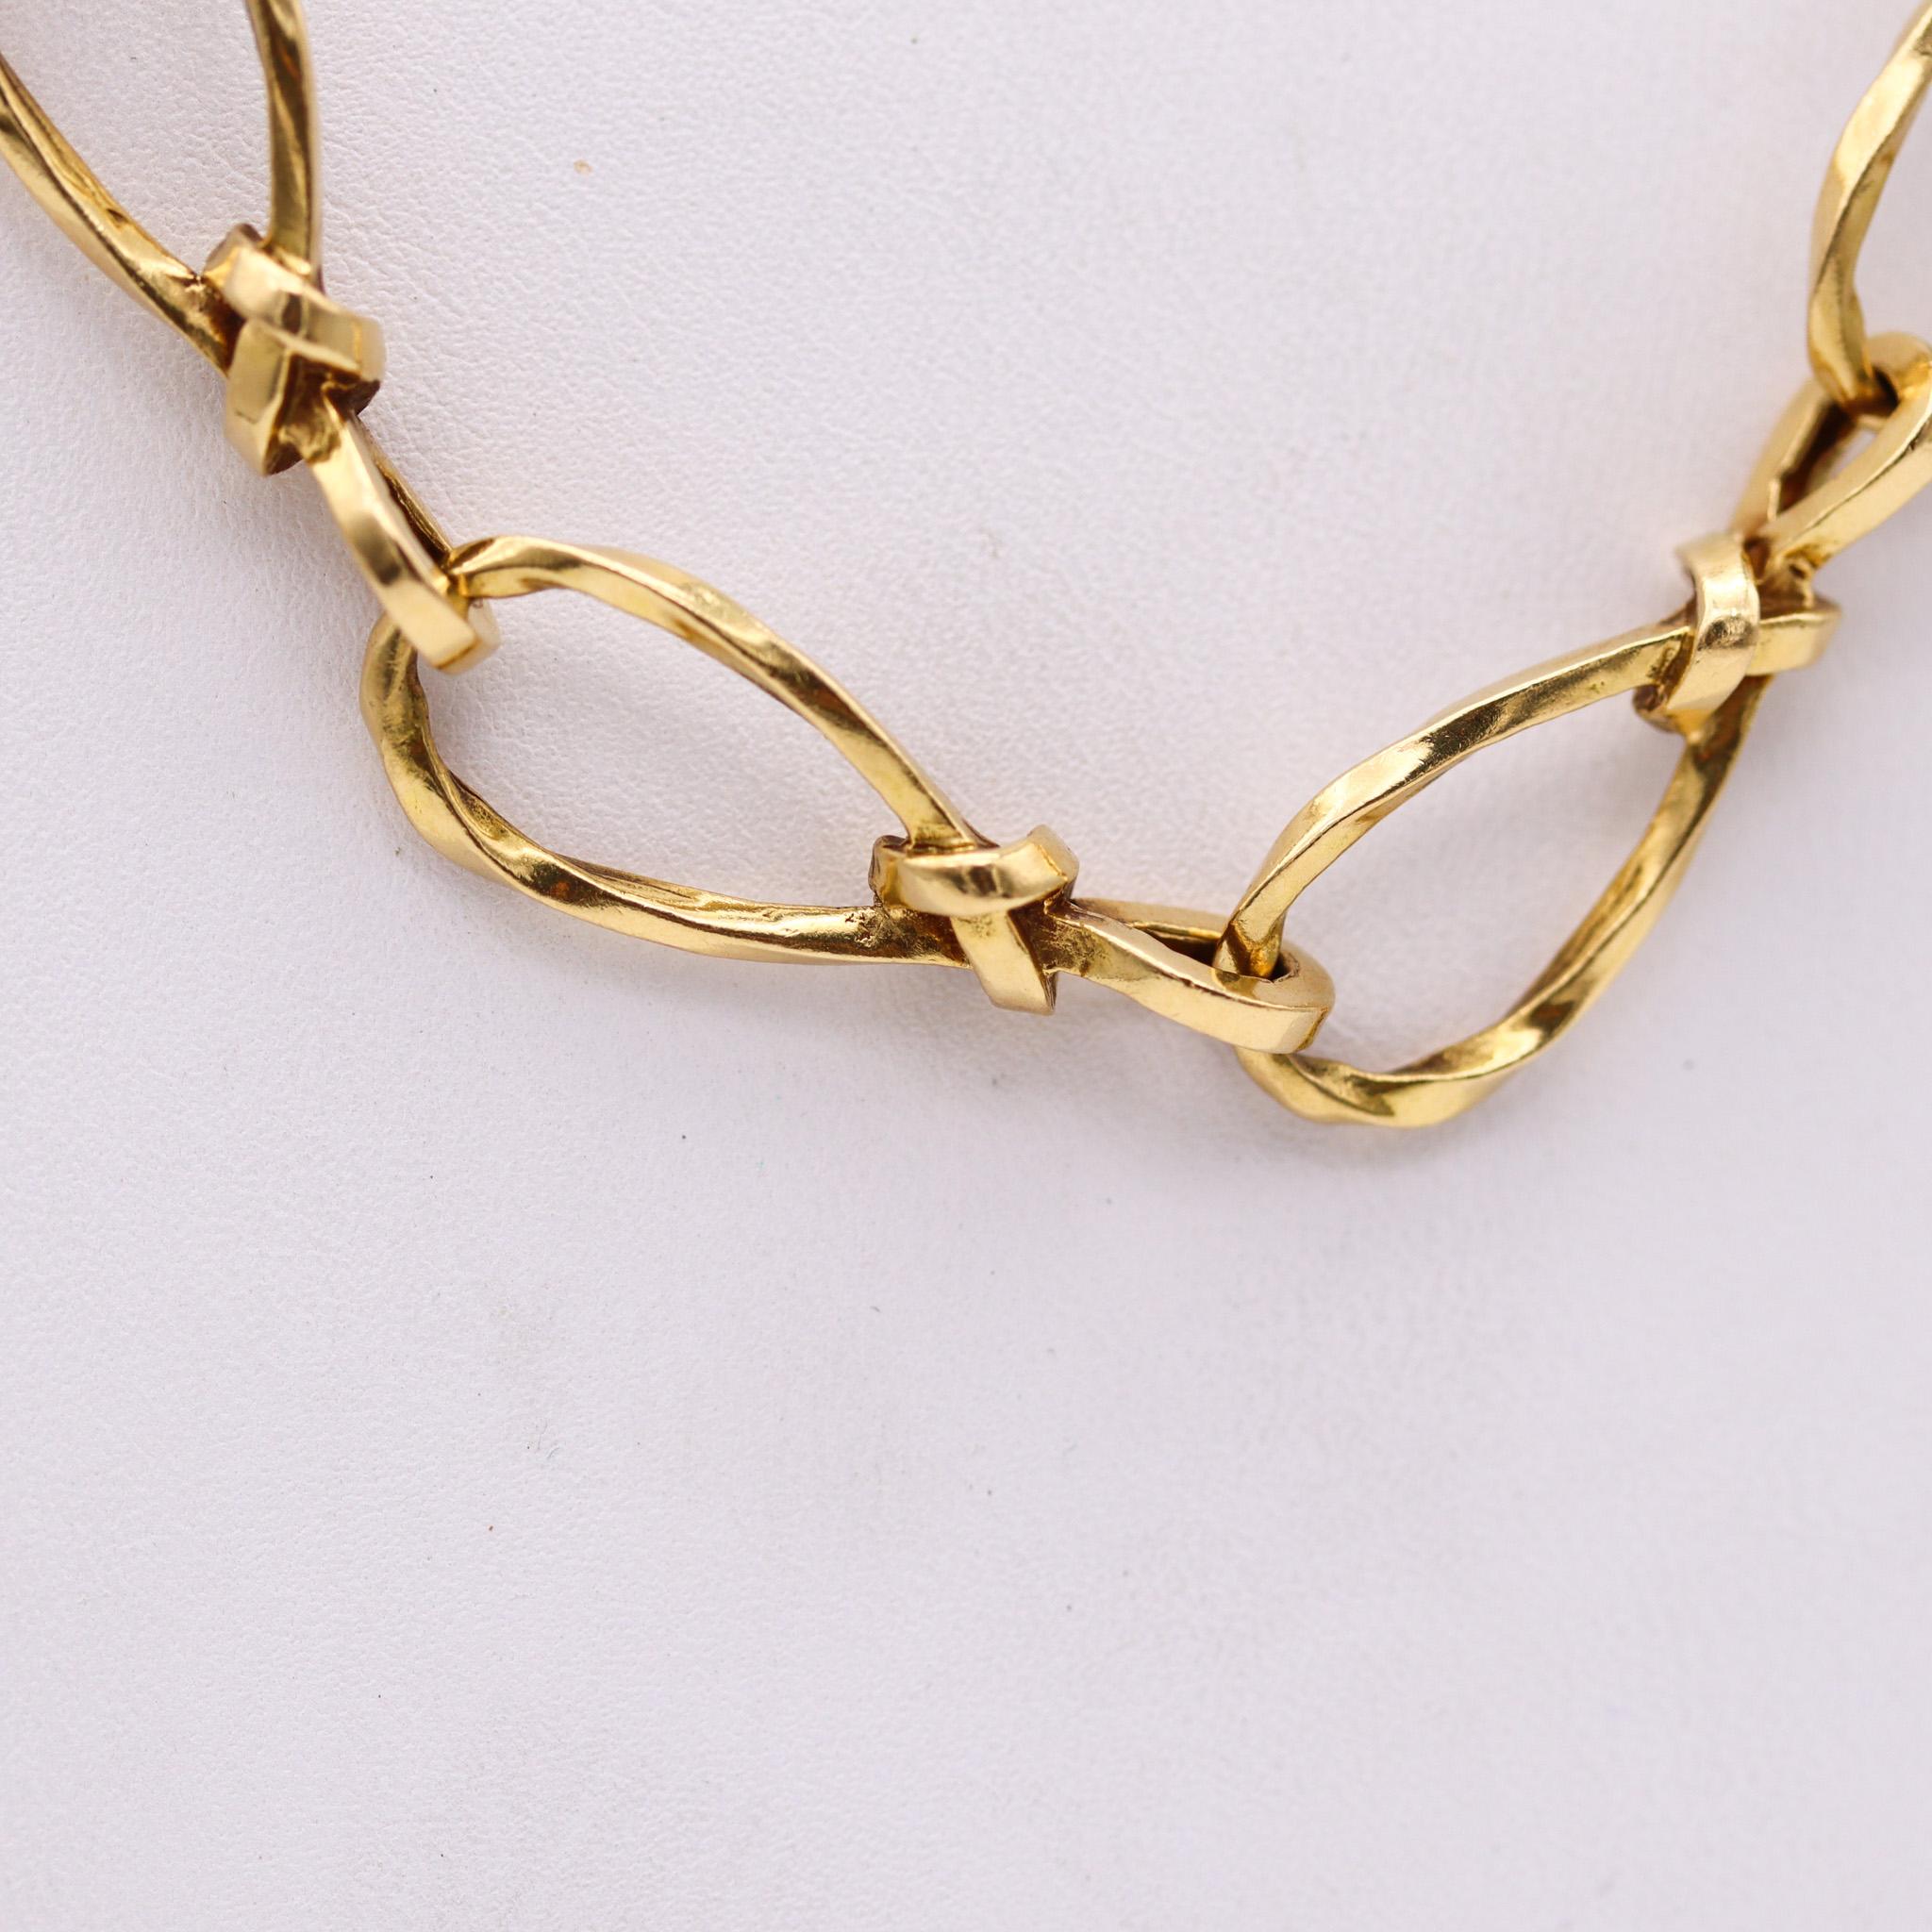 Modernist twisted links necklace sautoir made in France.

A very unusual long necklace sautoir, created in Paris France back in the 1970. This necklace chain, was crafted with modernist patterns and is composed by thirty free forms twisted links